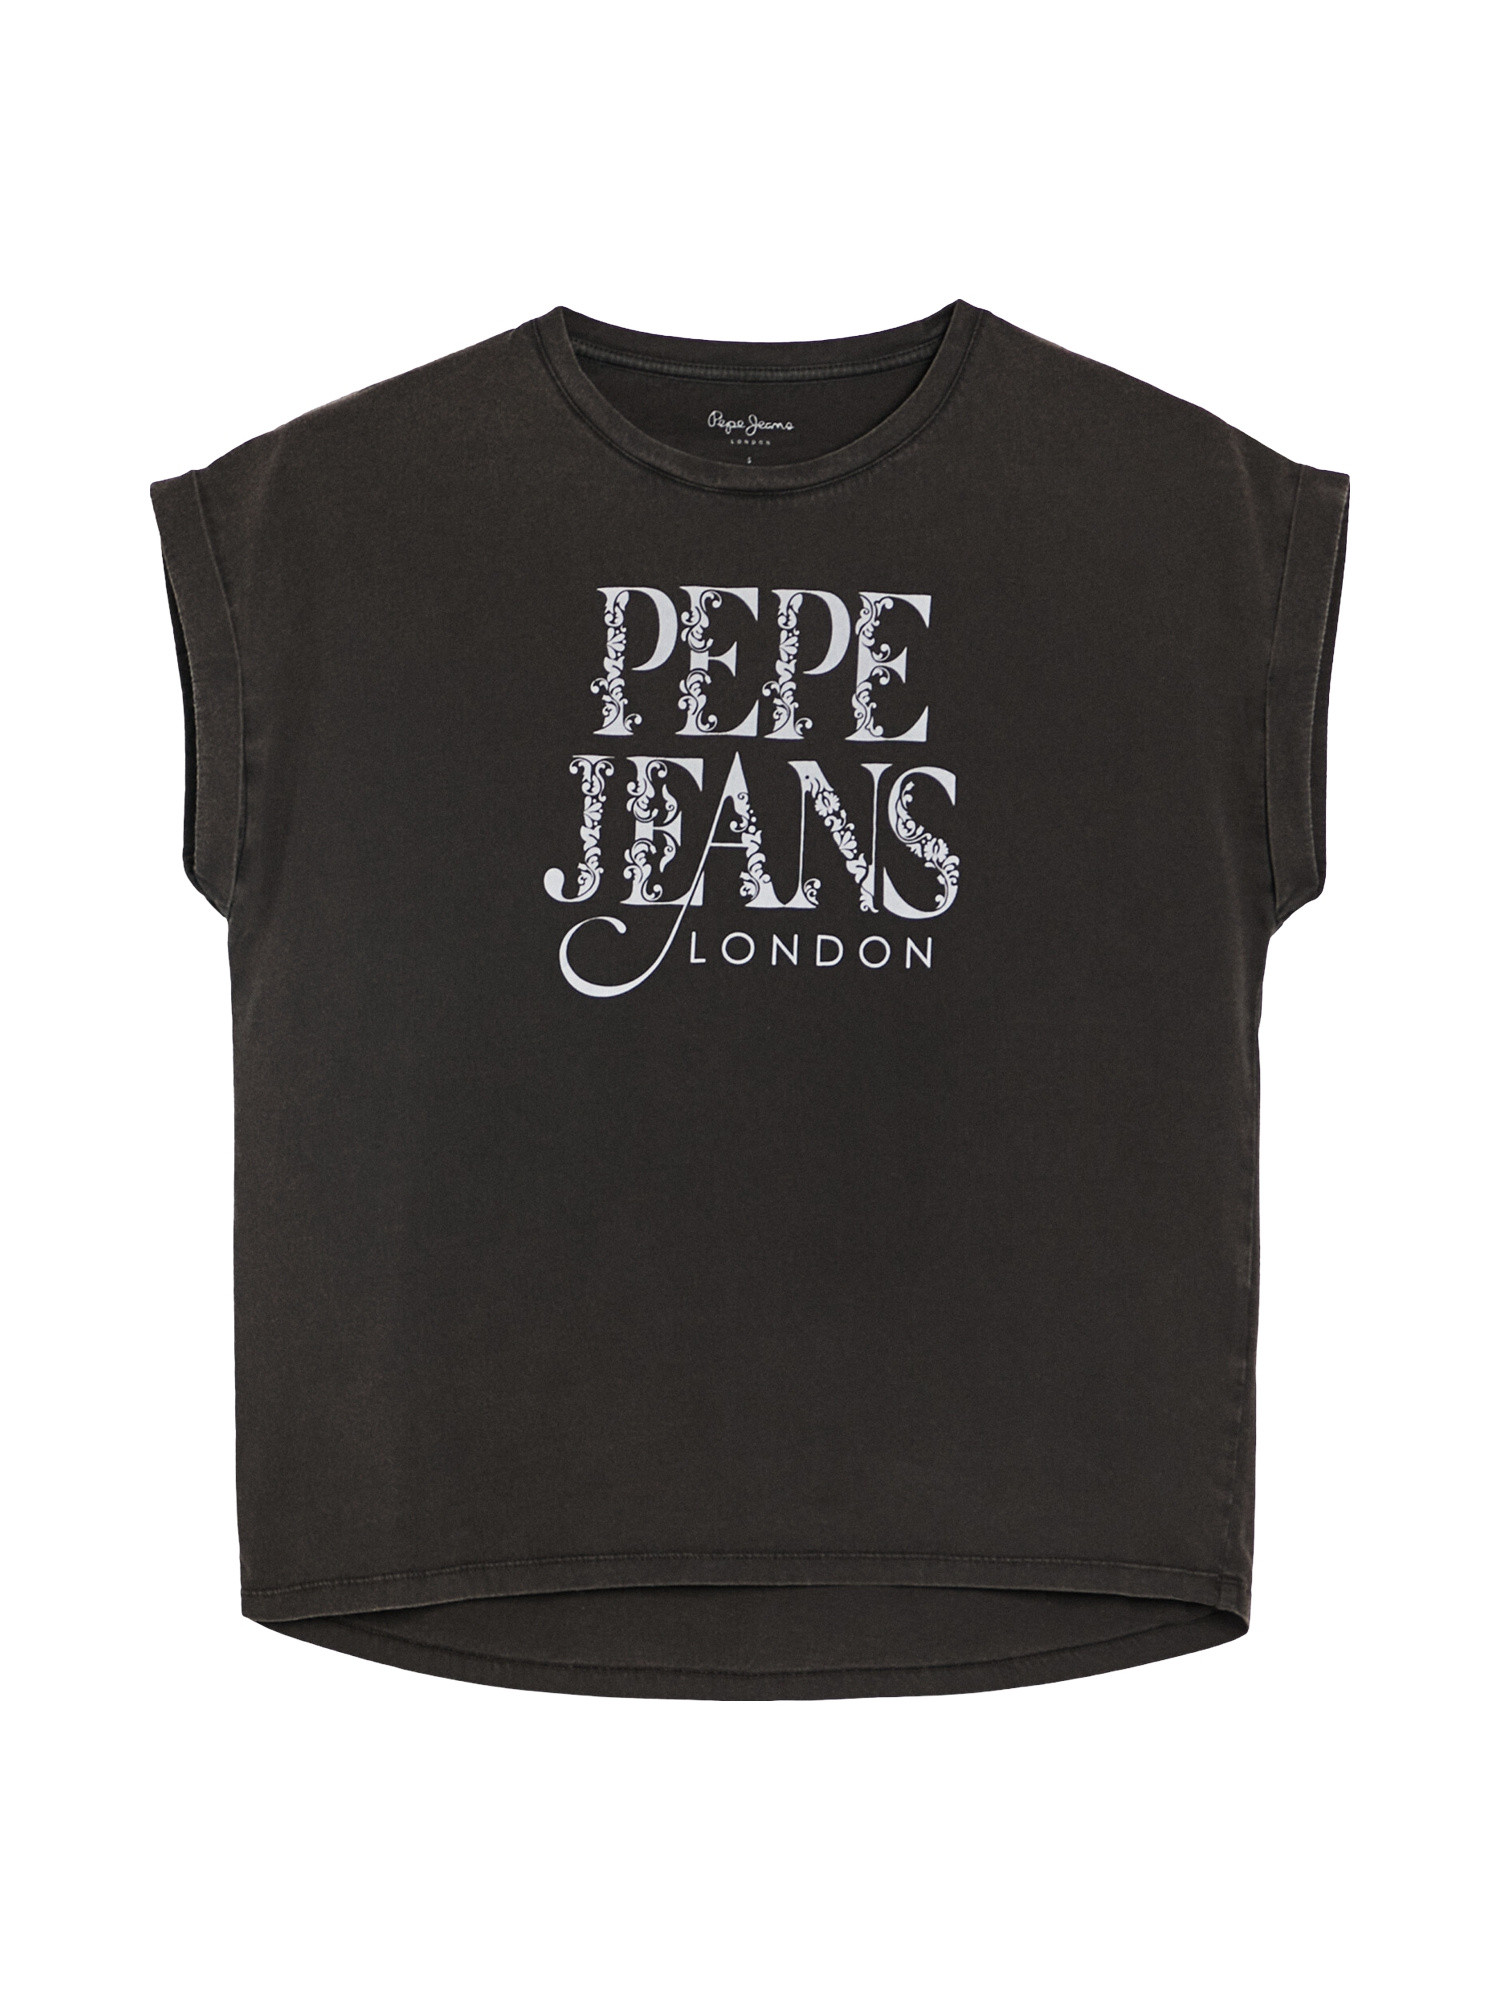 Pepe Jeans - T-shirt con logo in cotone, Nero, large image number 0